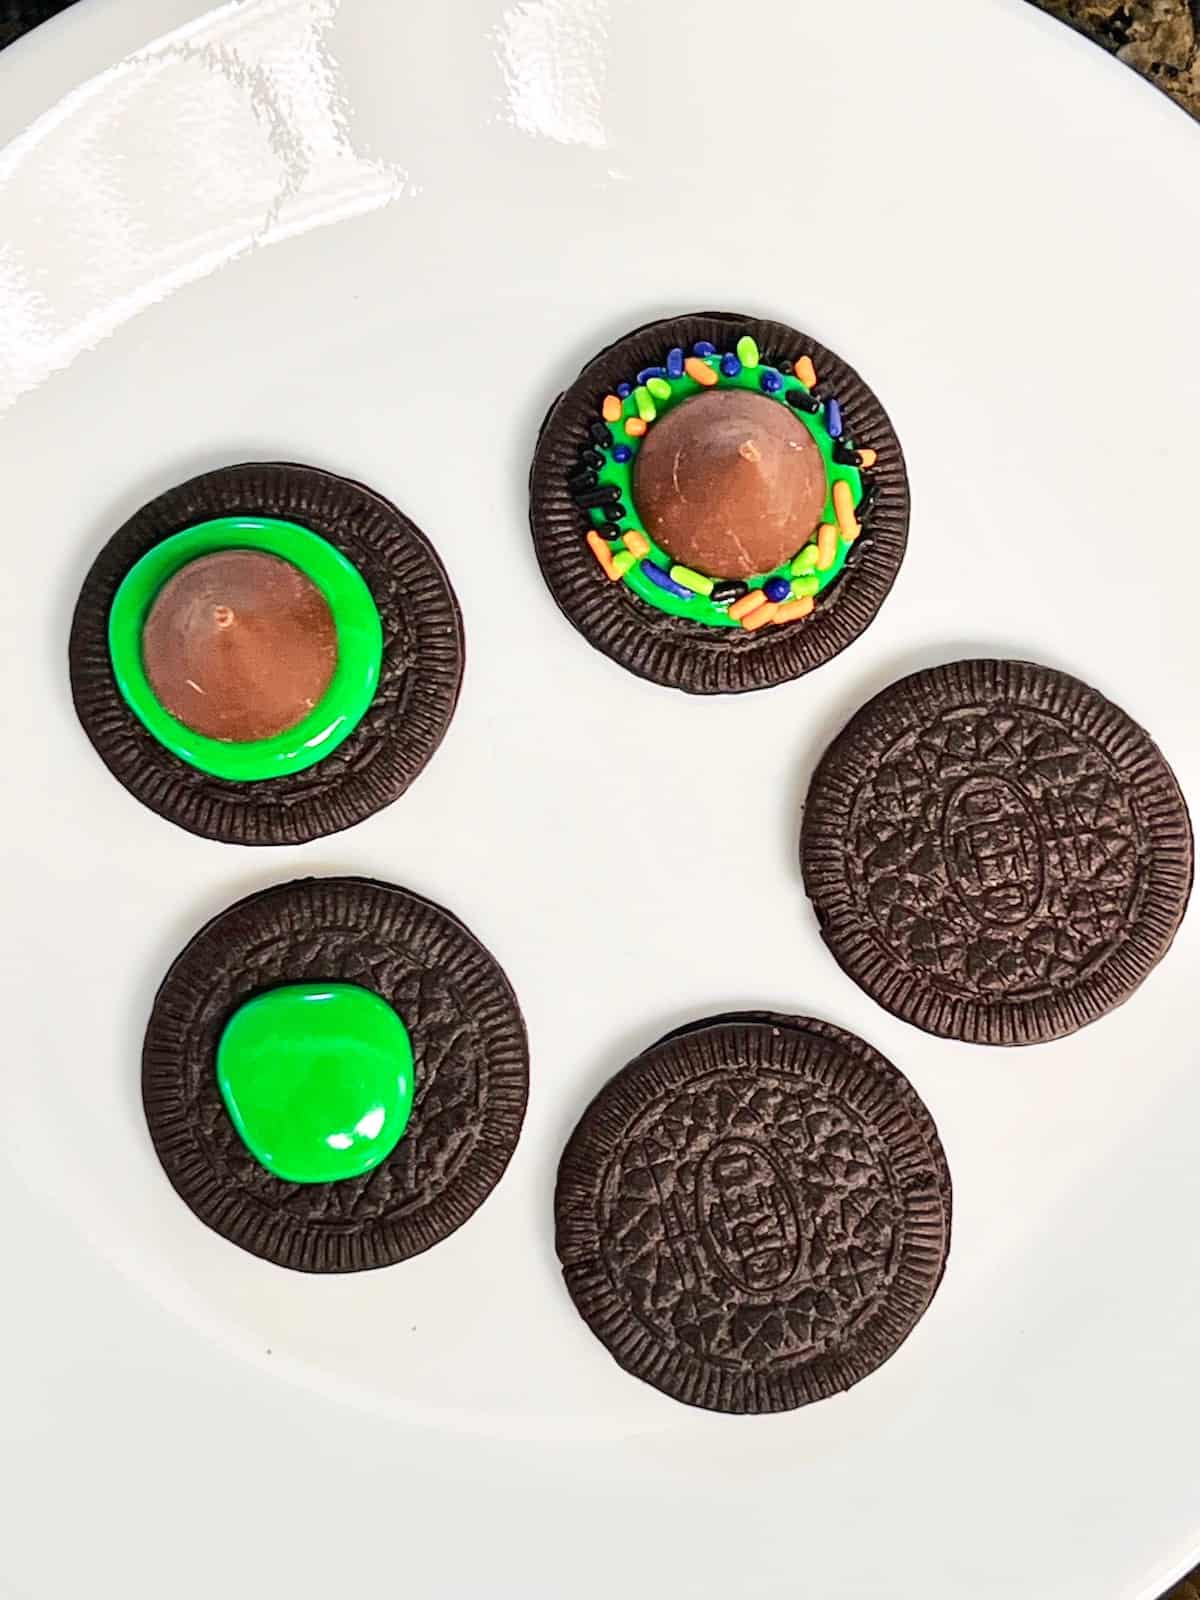 5 Oreo cookies on a plate each topped differently.